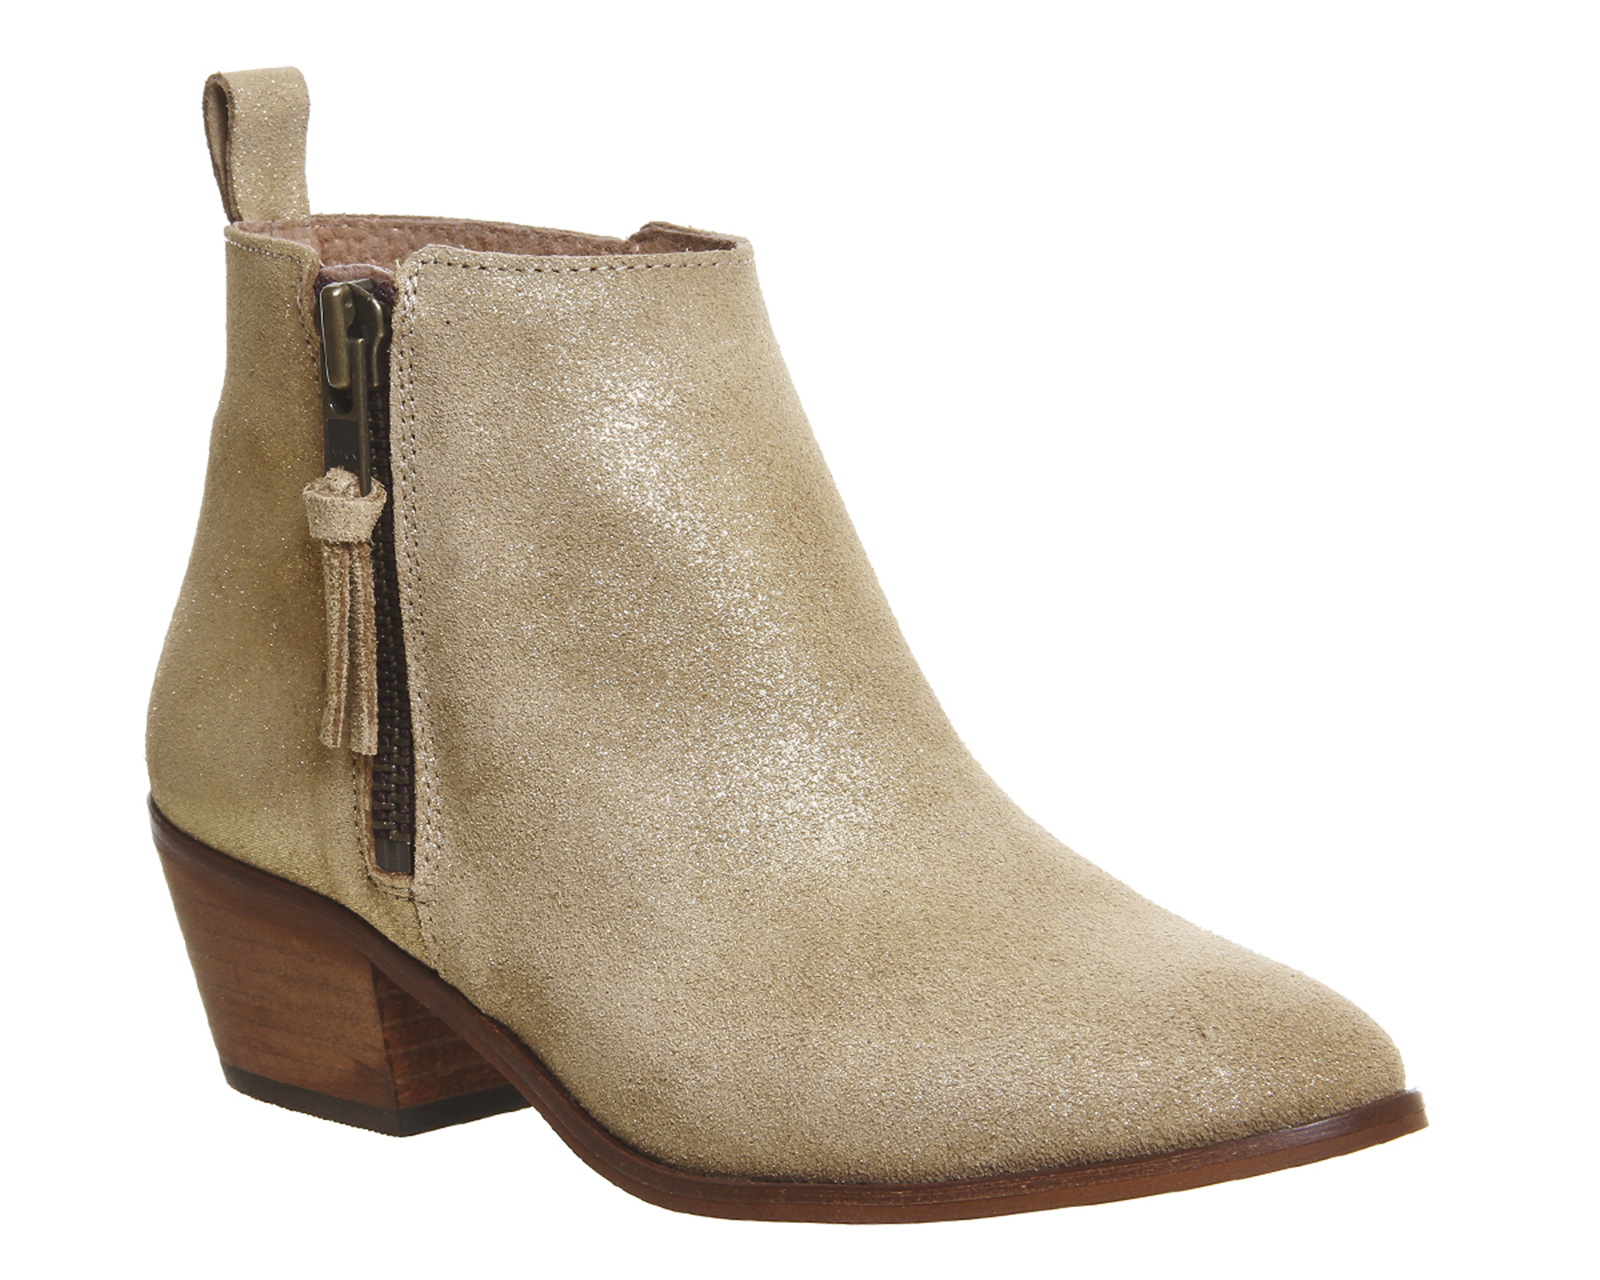 OFFICEImposter Side Zip Ankle BootGold Metallic Suede